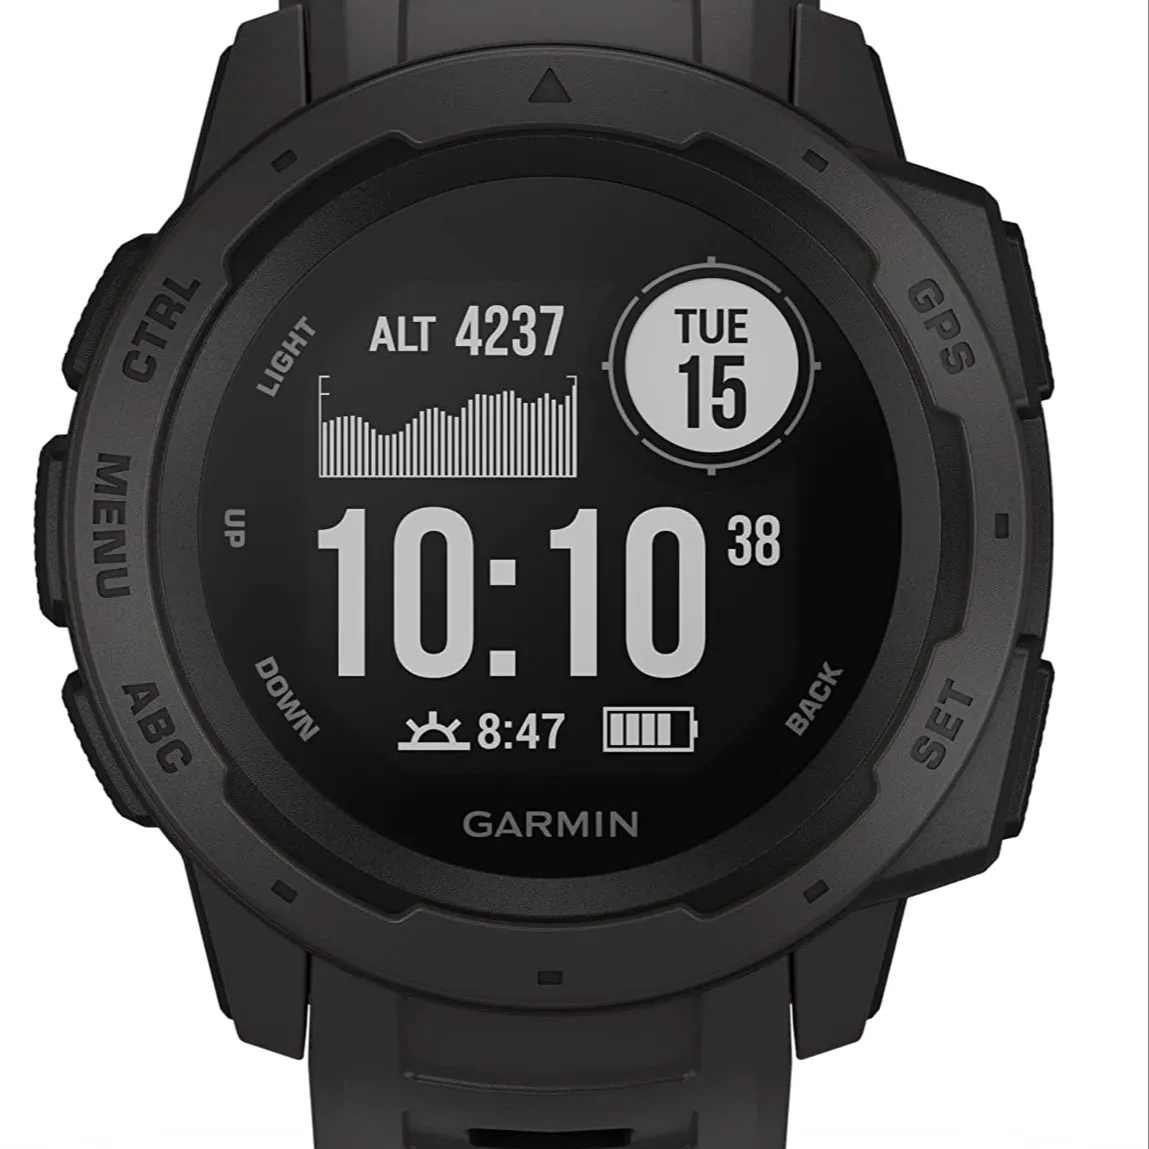 Super High Quality Garmins 010-02064-00 Instinct, Rugged Outdoor Watch with GPS,Features Glonass and Galileo, Heart Rate Monitor